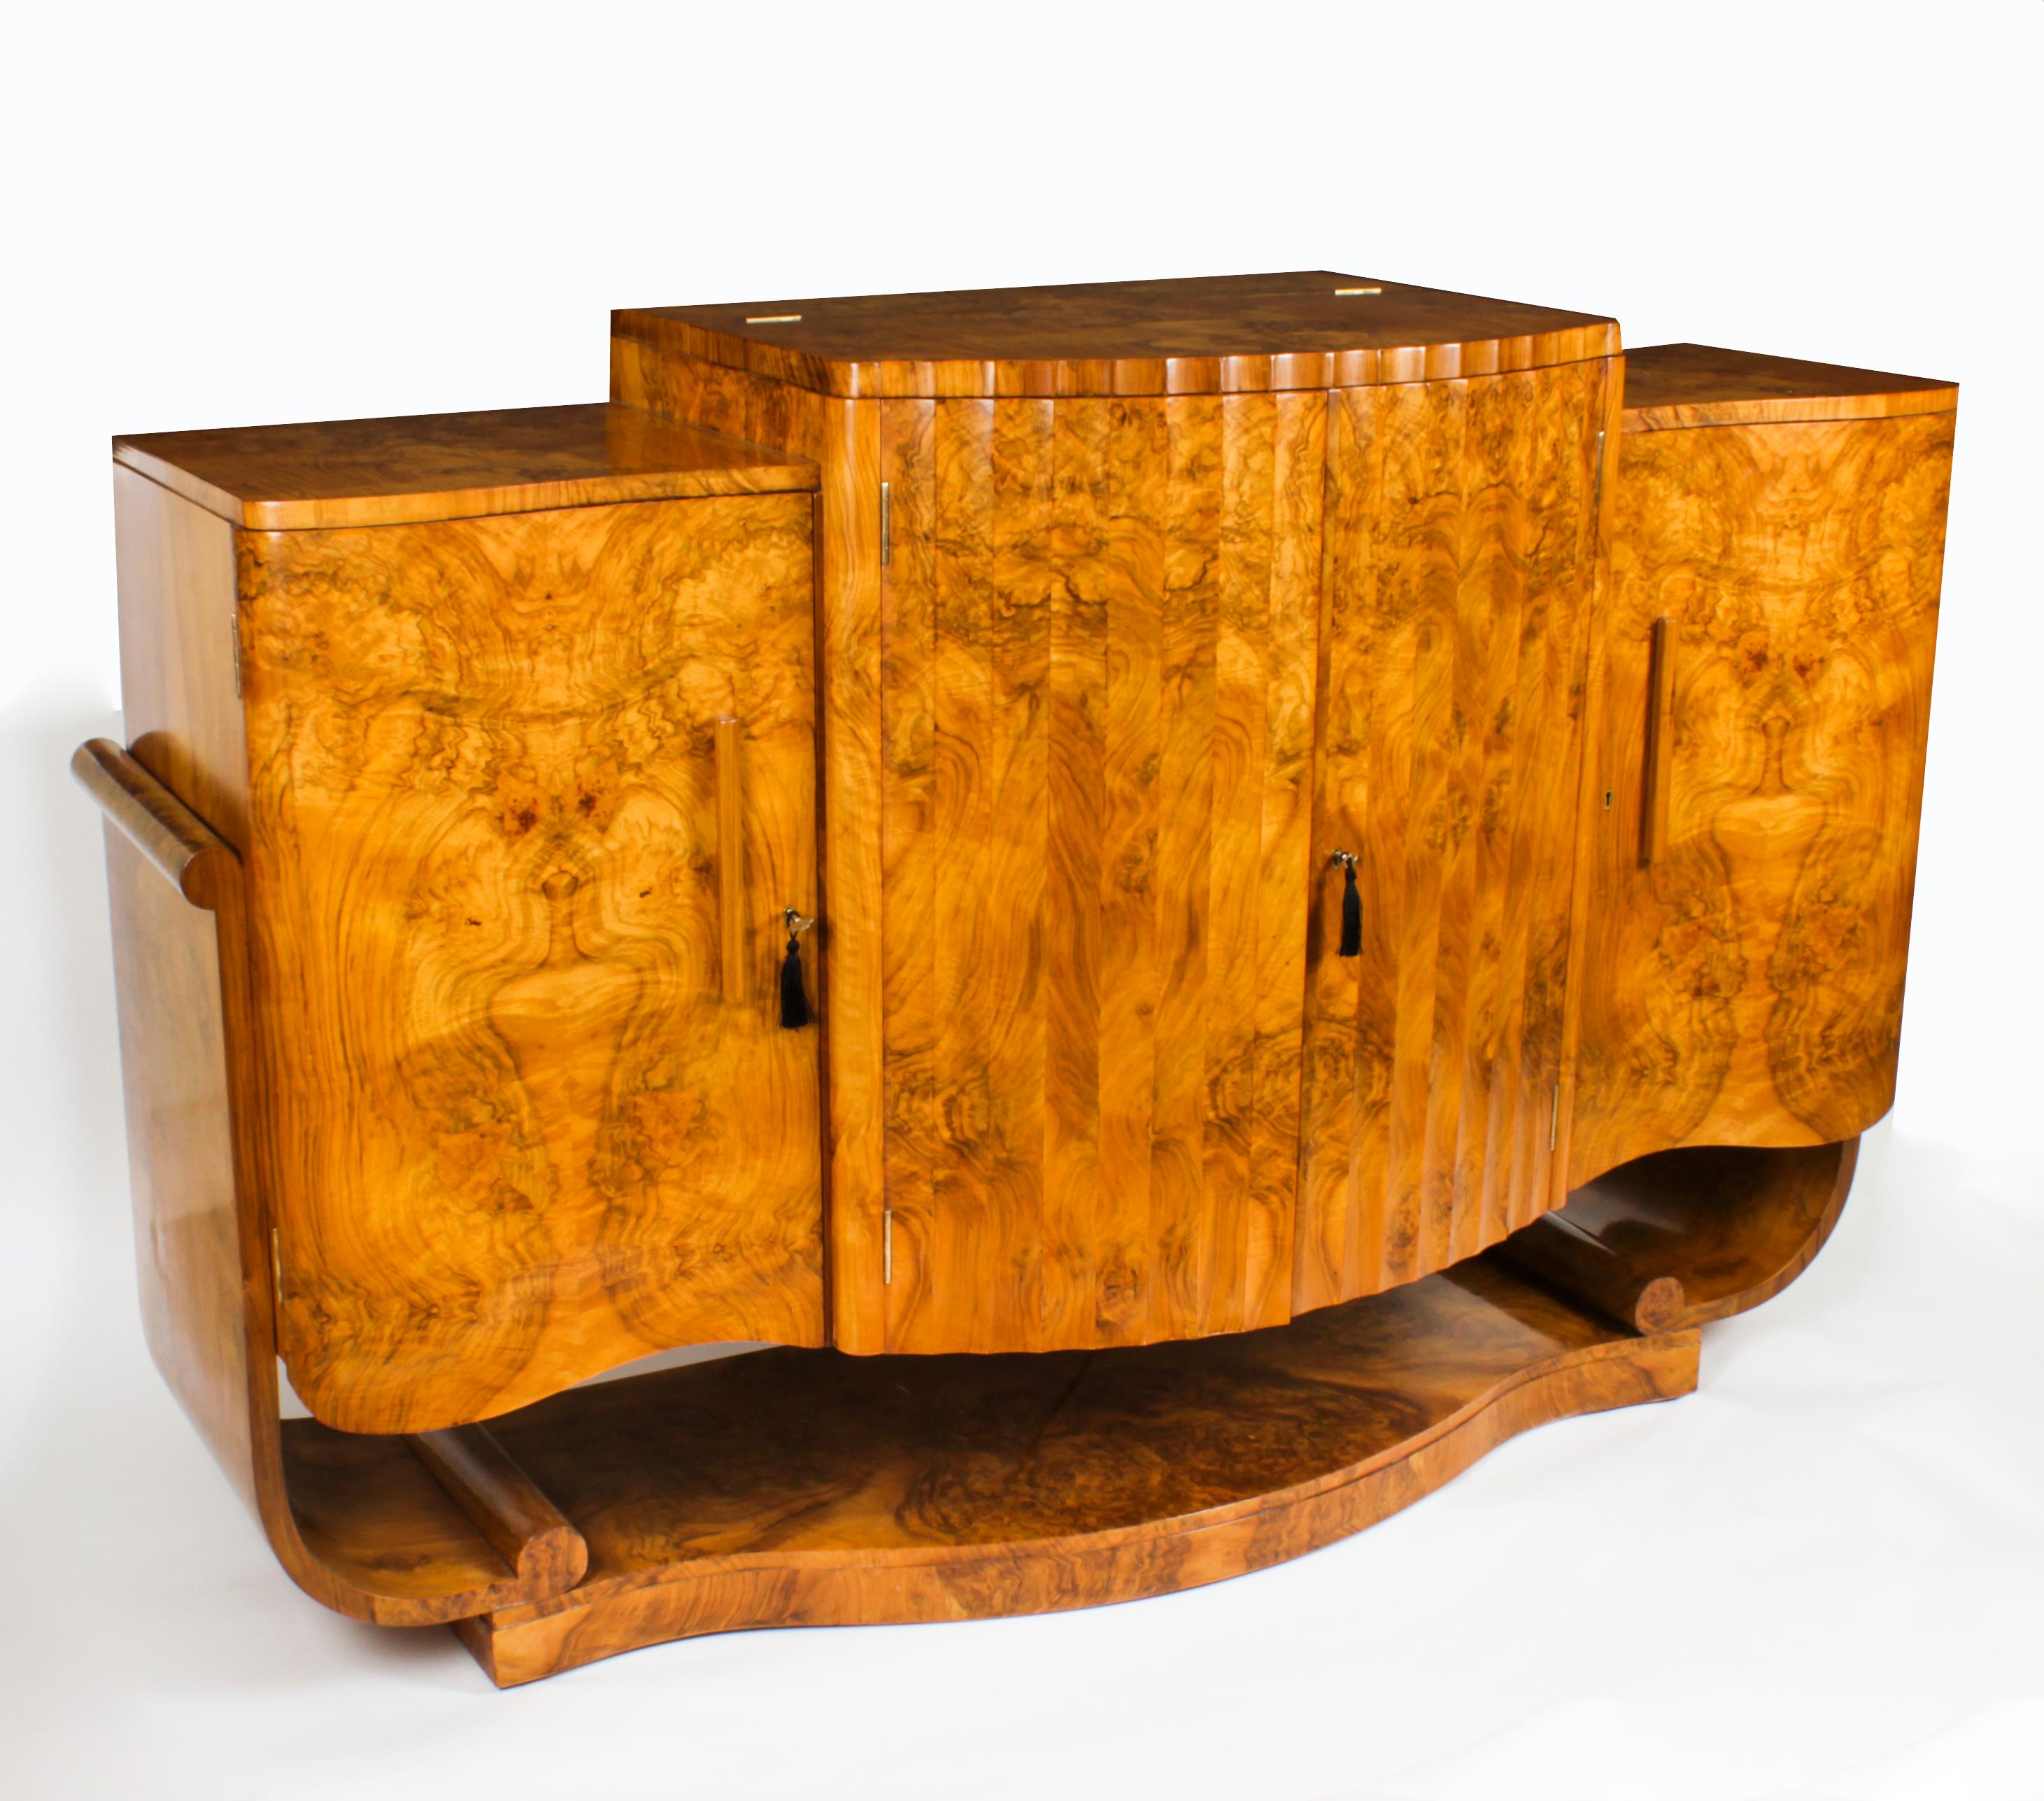 This is a superb antique Art Deco Burr Walnut Cocktail Cabinet and Sideboard attributed to Harry and Lou Epstein complete with crystal glassware, C1920 in date.
 
The cabinet has wonderful burr walnut veneers and features a shaped form with a